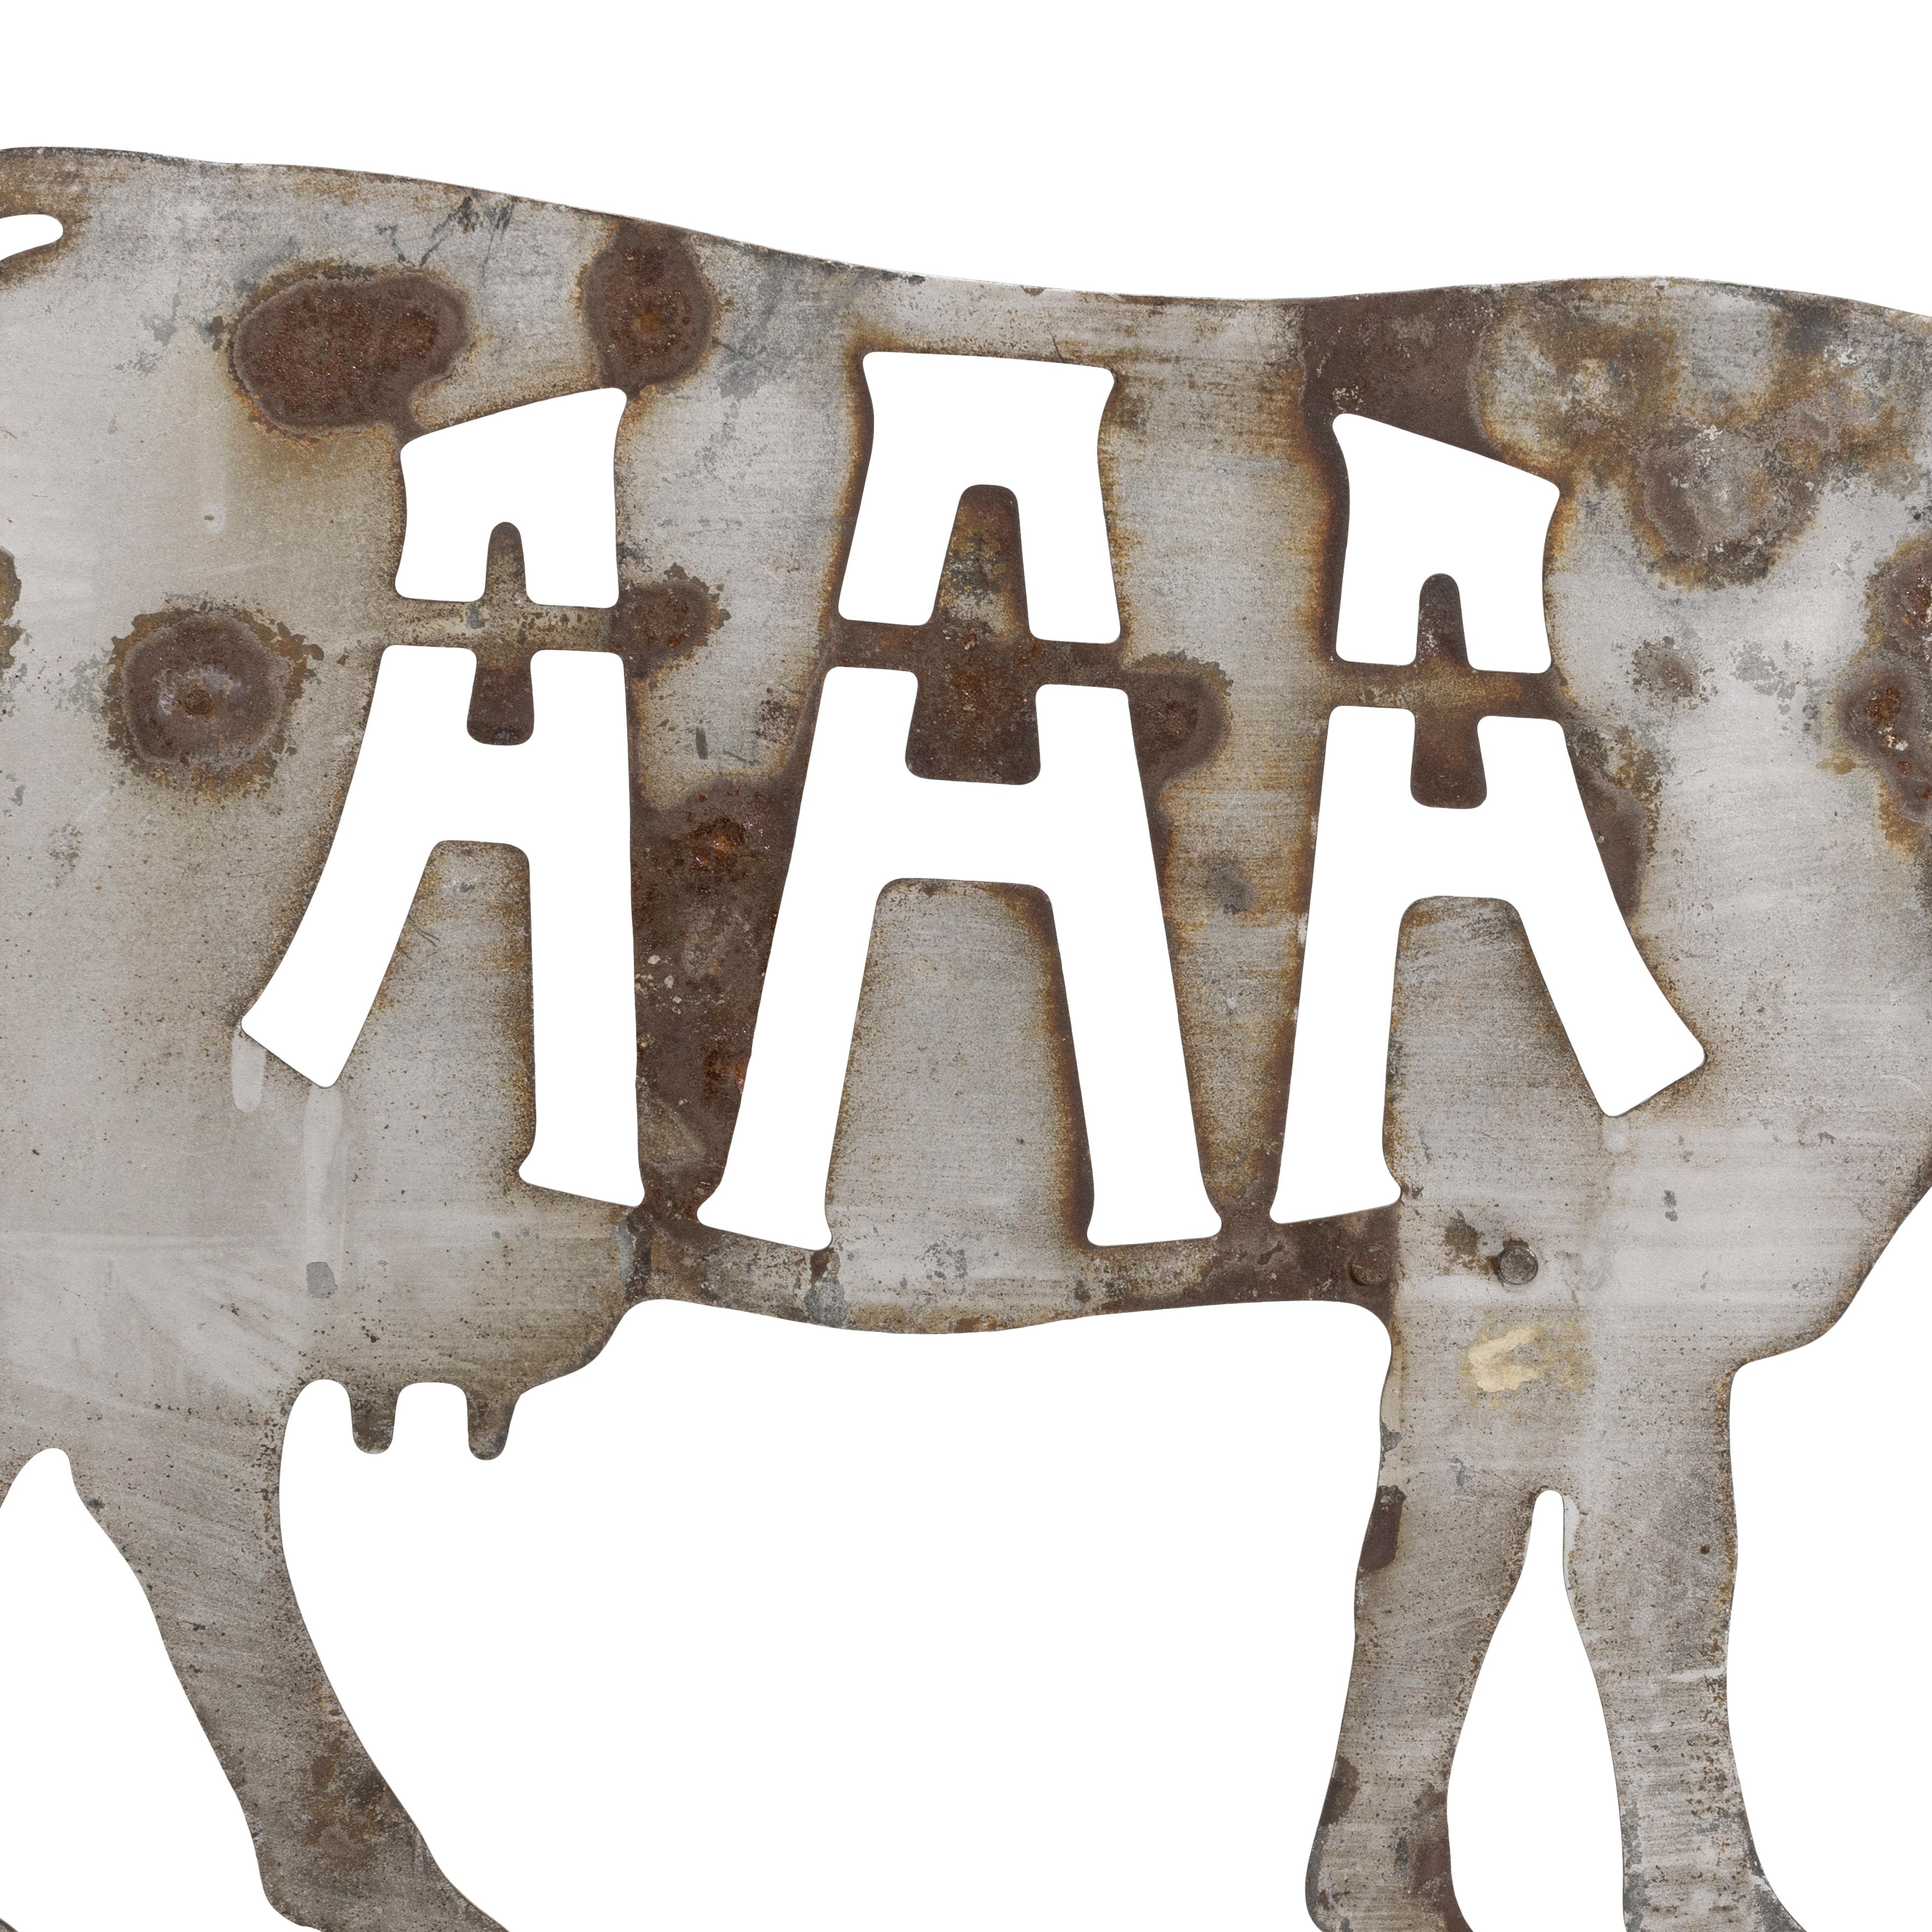 19th Century American Angus Association cut iron cow form weather vane with cutouts A-A-A. A few 